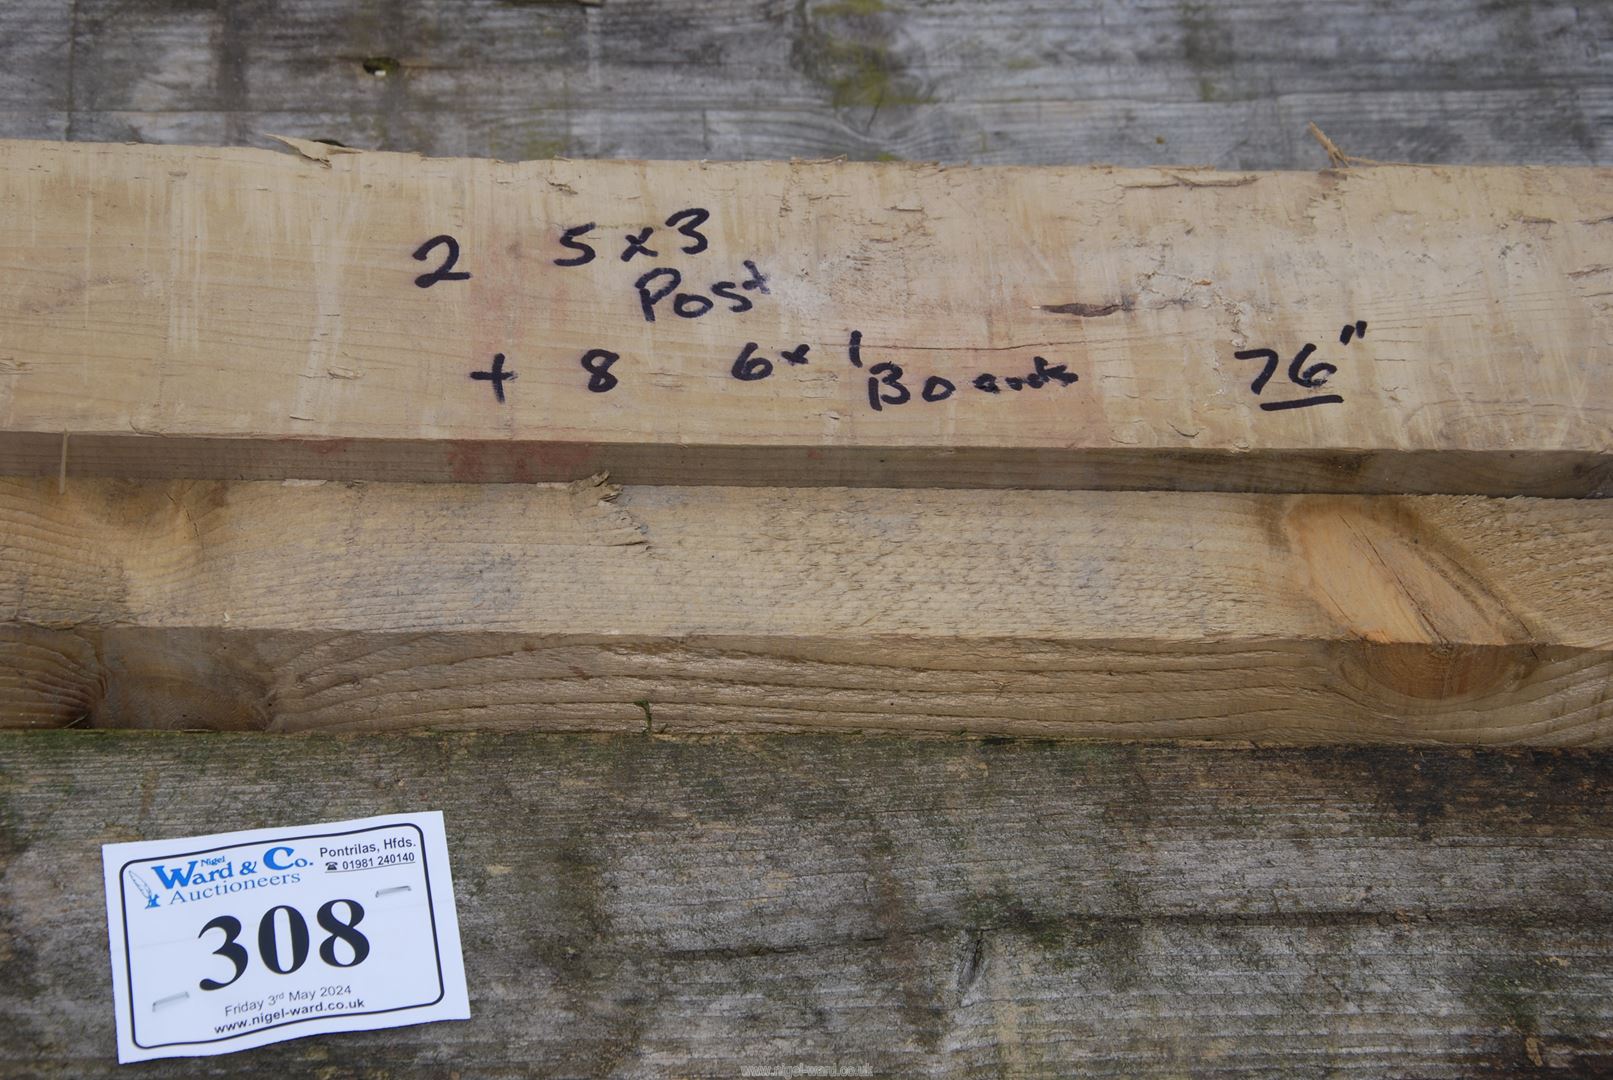 Two x 5" x 3" softwood Posts, and eight x 6" x 1" softwood boards 76" long. - Image 2 of 2